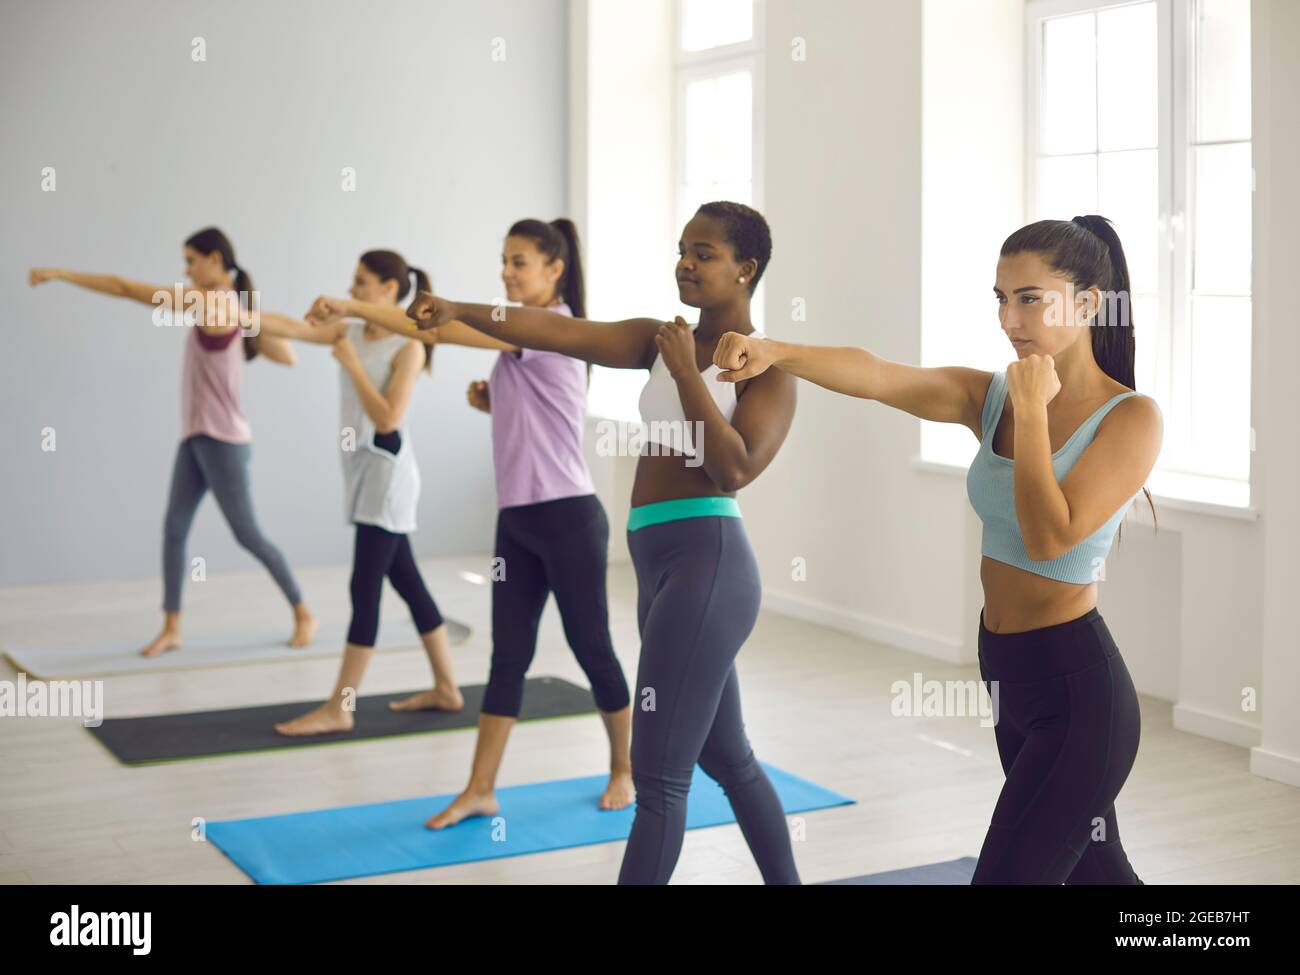 Diverse group of young women doing physical exercise during fitness workout at gym Stock Photo